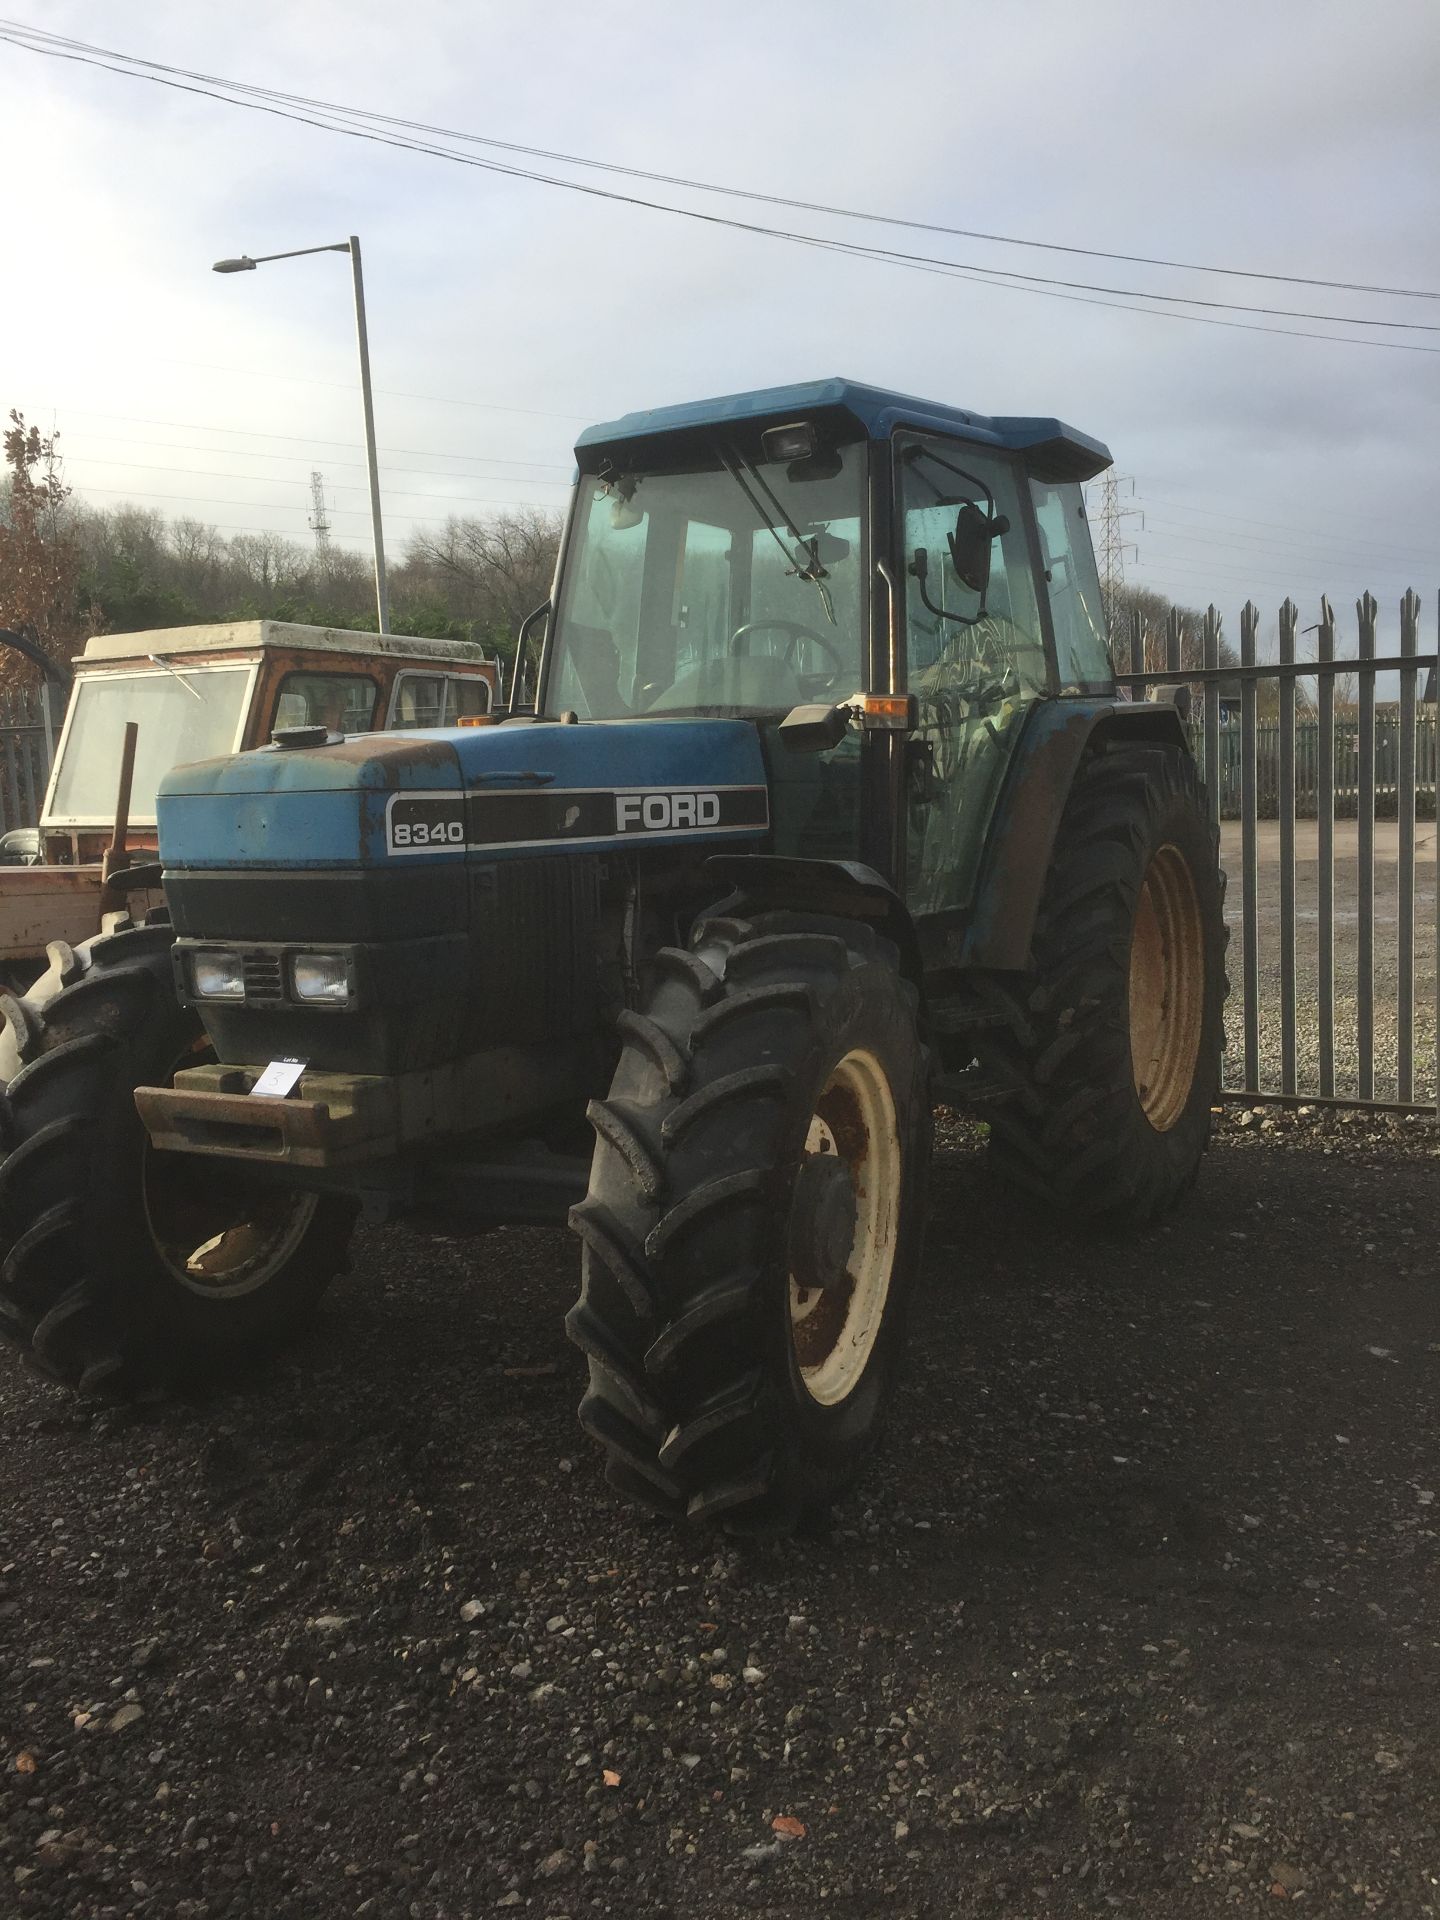 New Holland 8340 4wd tractor, Registration No. N367 NAD Hours: 1752 (not verified) - Image 2 of 5